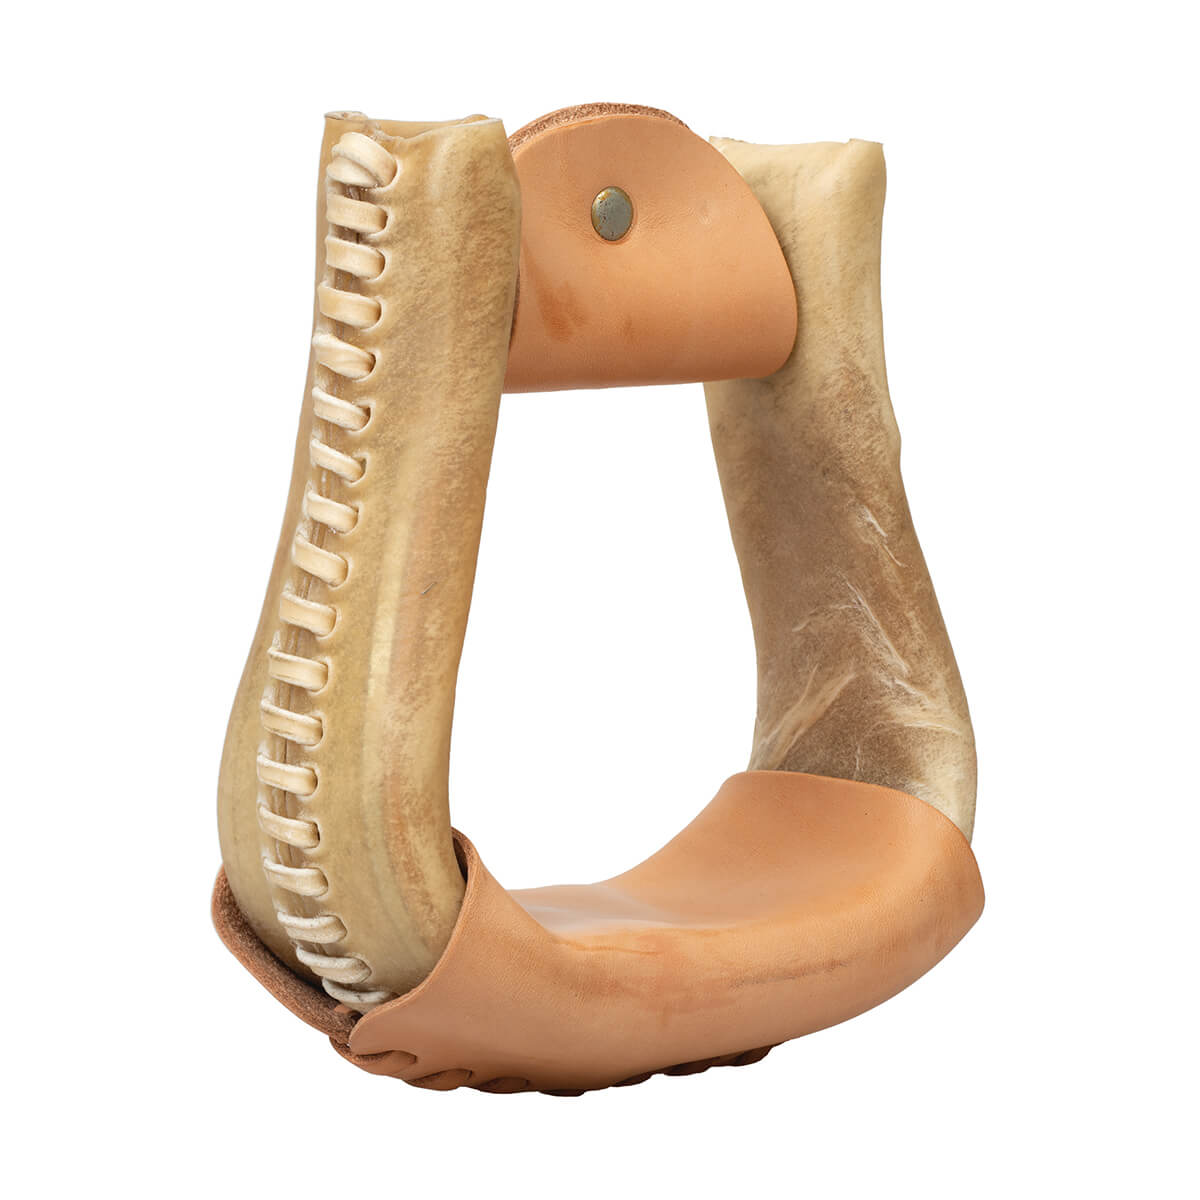 Covered Bell Stirrup - Natural - 3-in